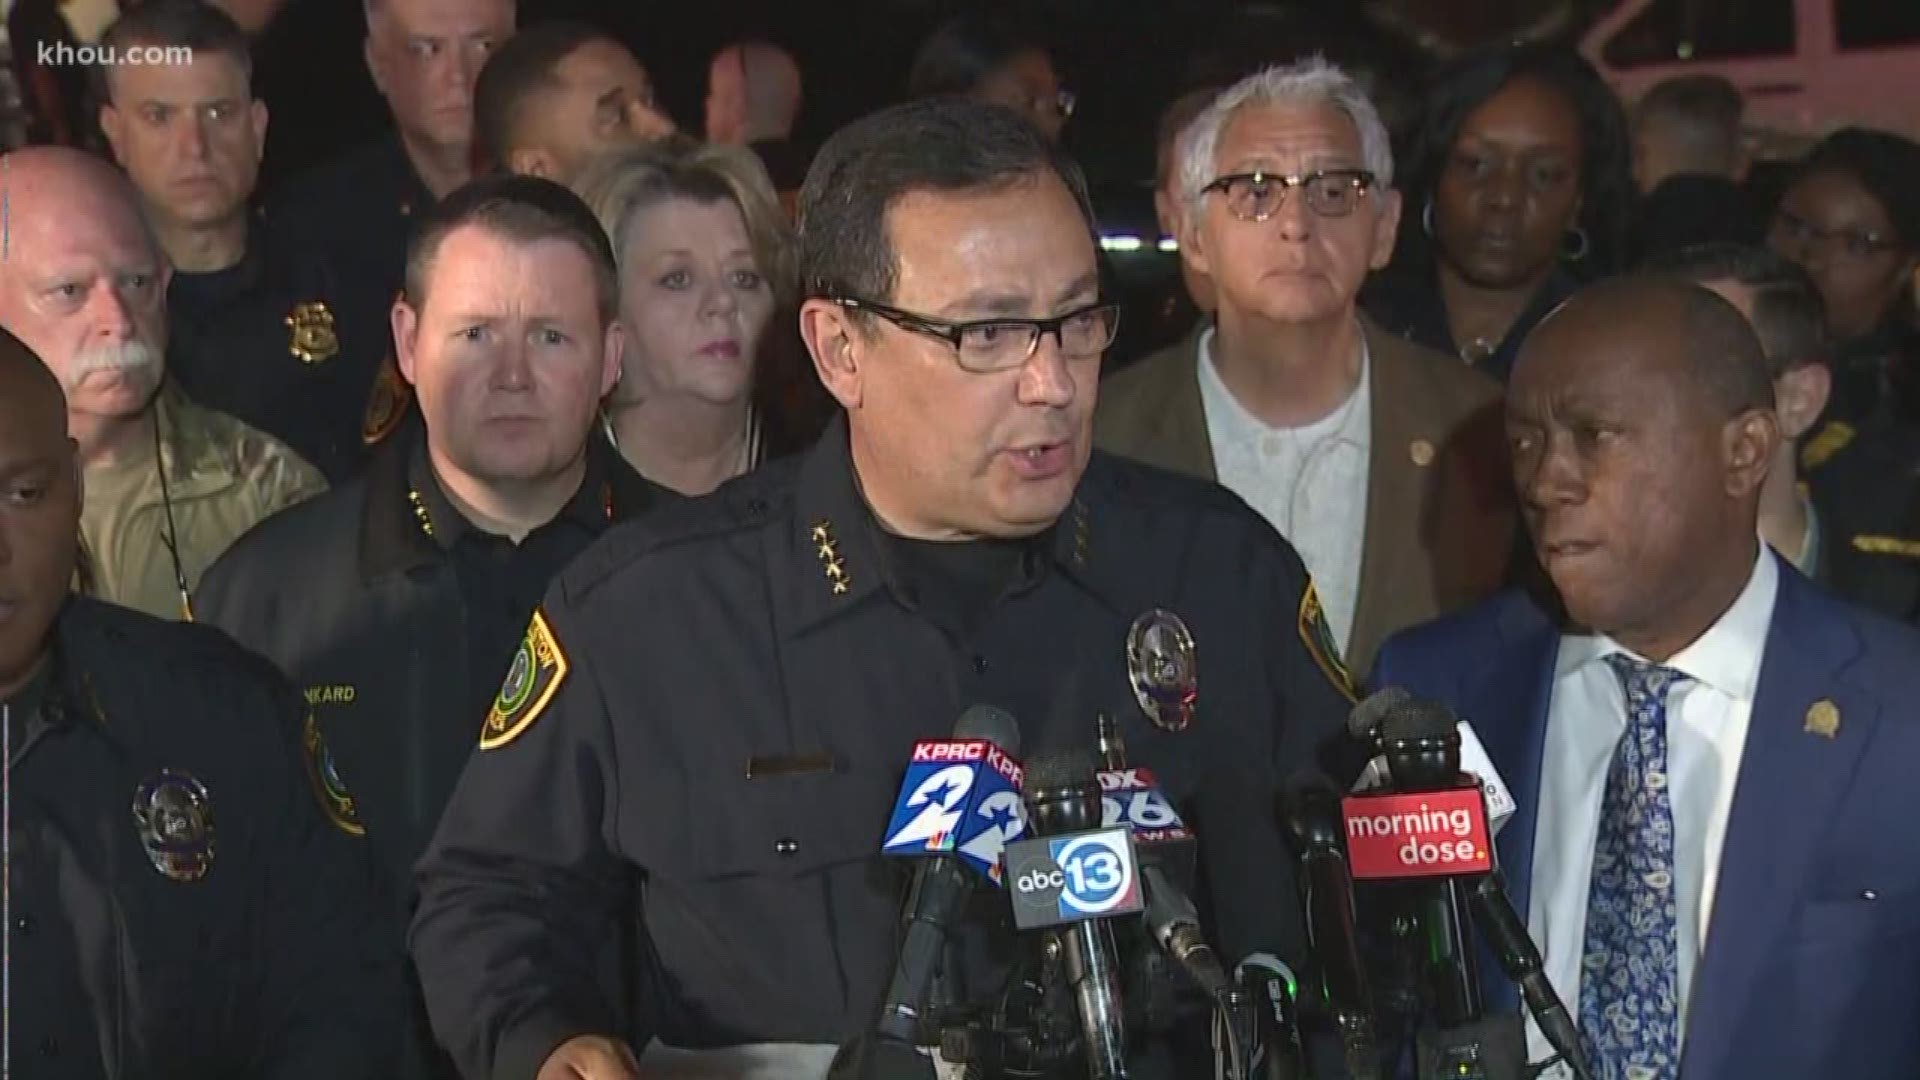 Houston Police Chief Art Acevedo, Mayor Sylvester Turner and other officials provide updates on the officers shot in southeast Houston while serving a narcotics warrant.